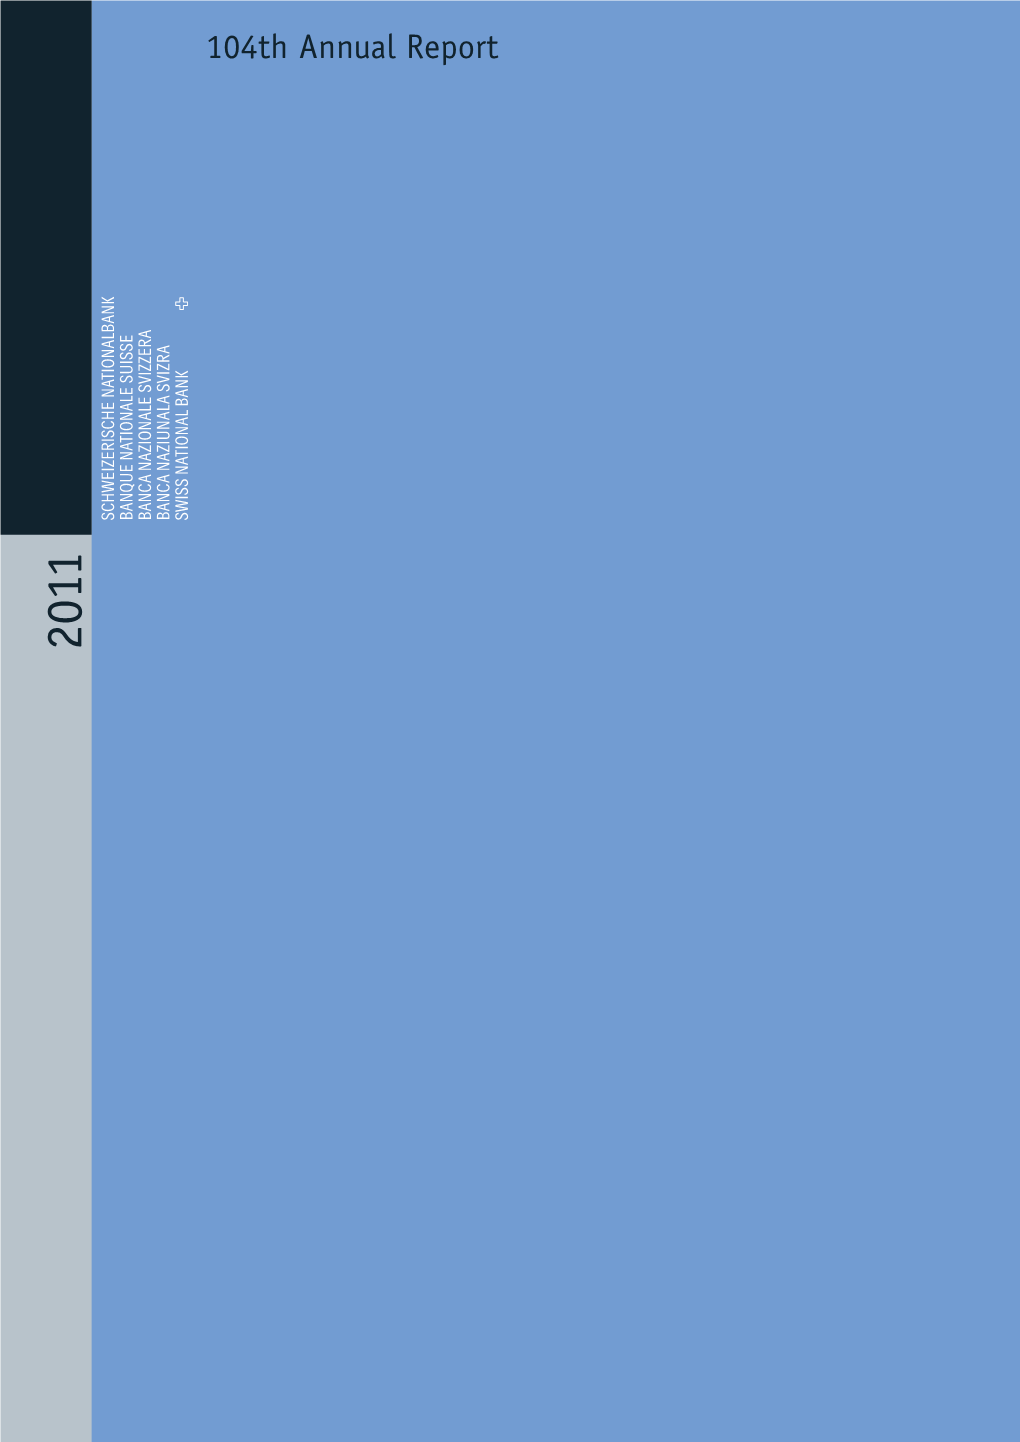 Swiss National Bank, 104Th Annual Report 2011